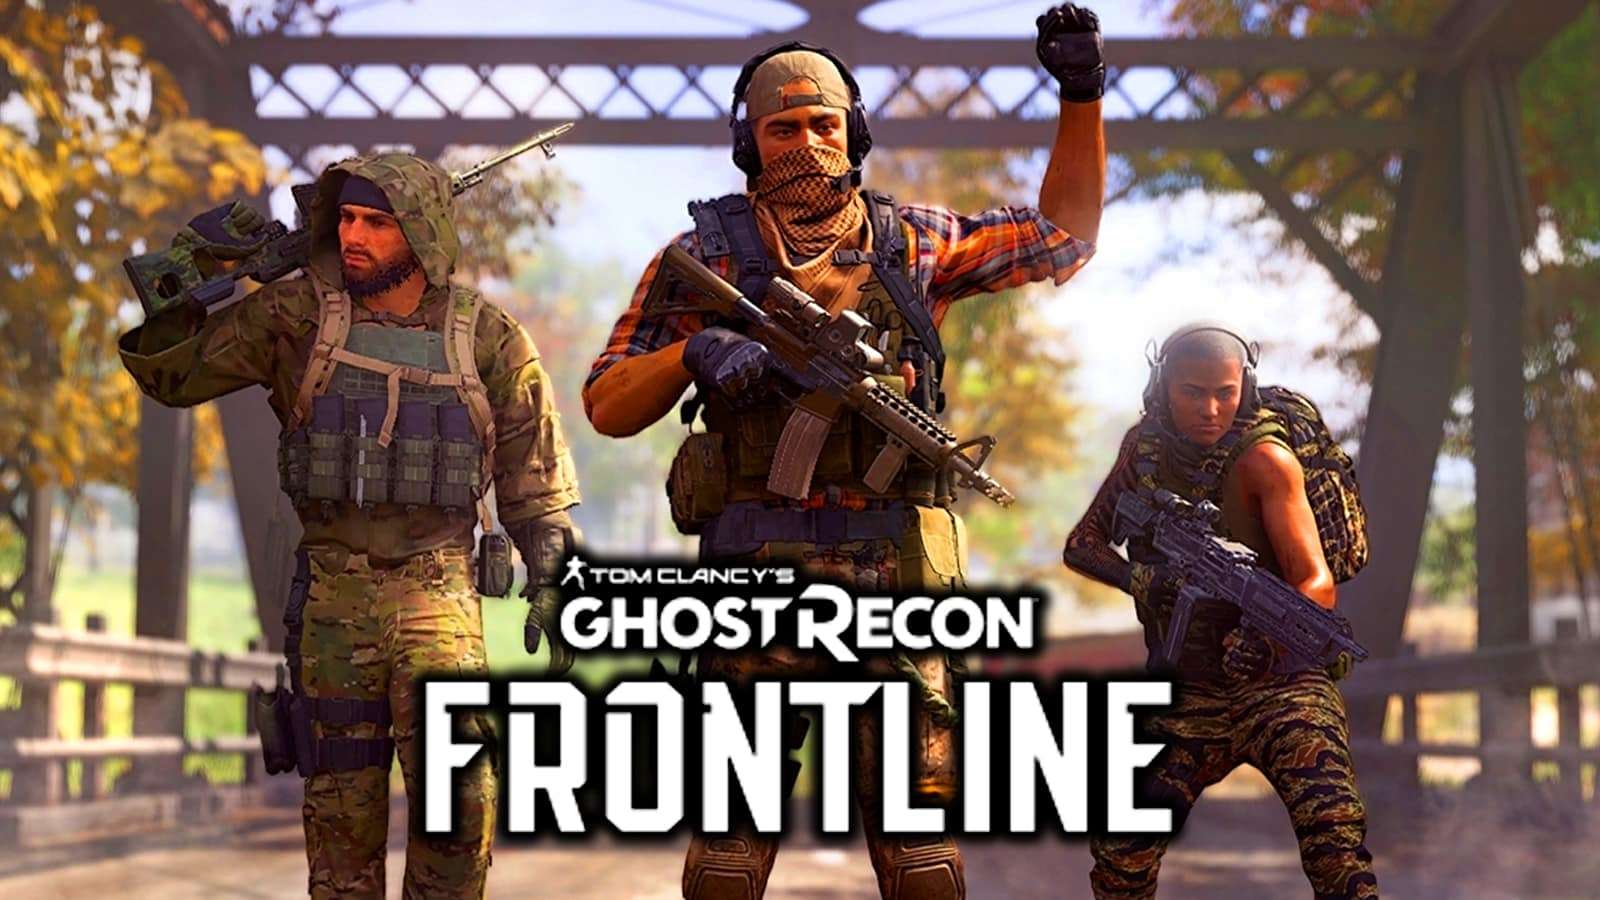 An image of Ghost Recon Frontline